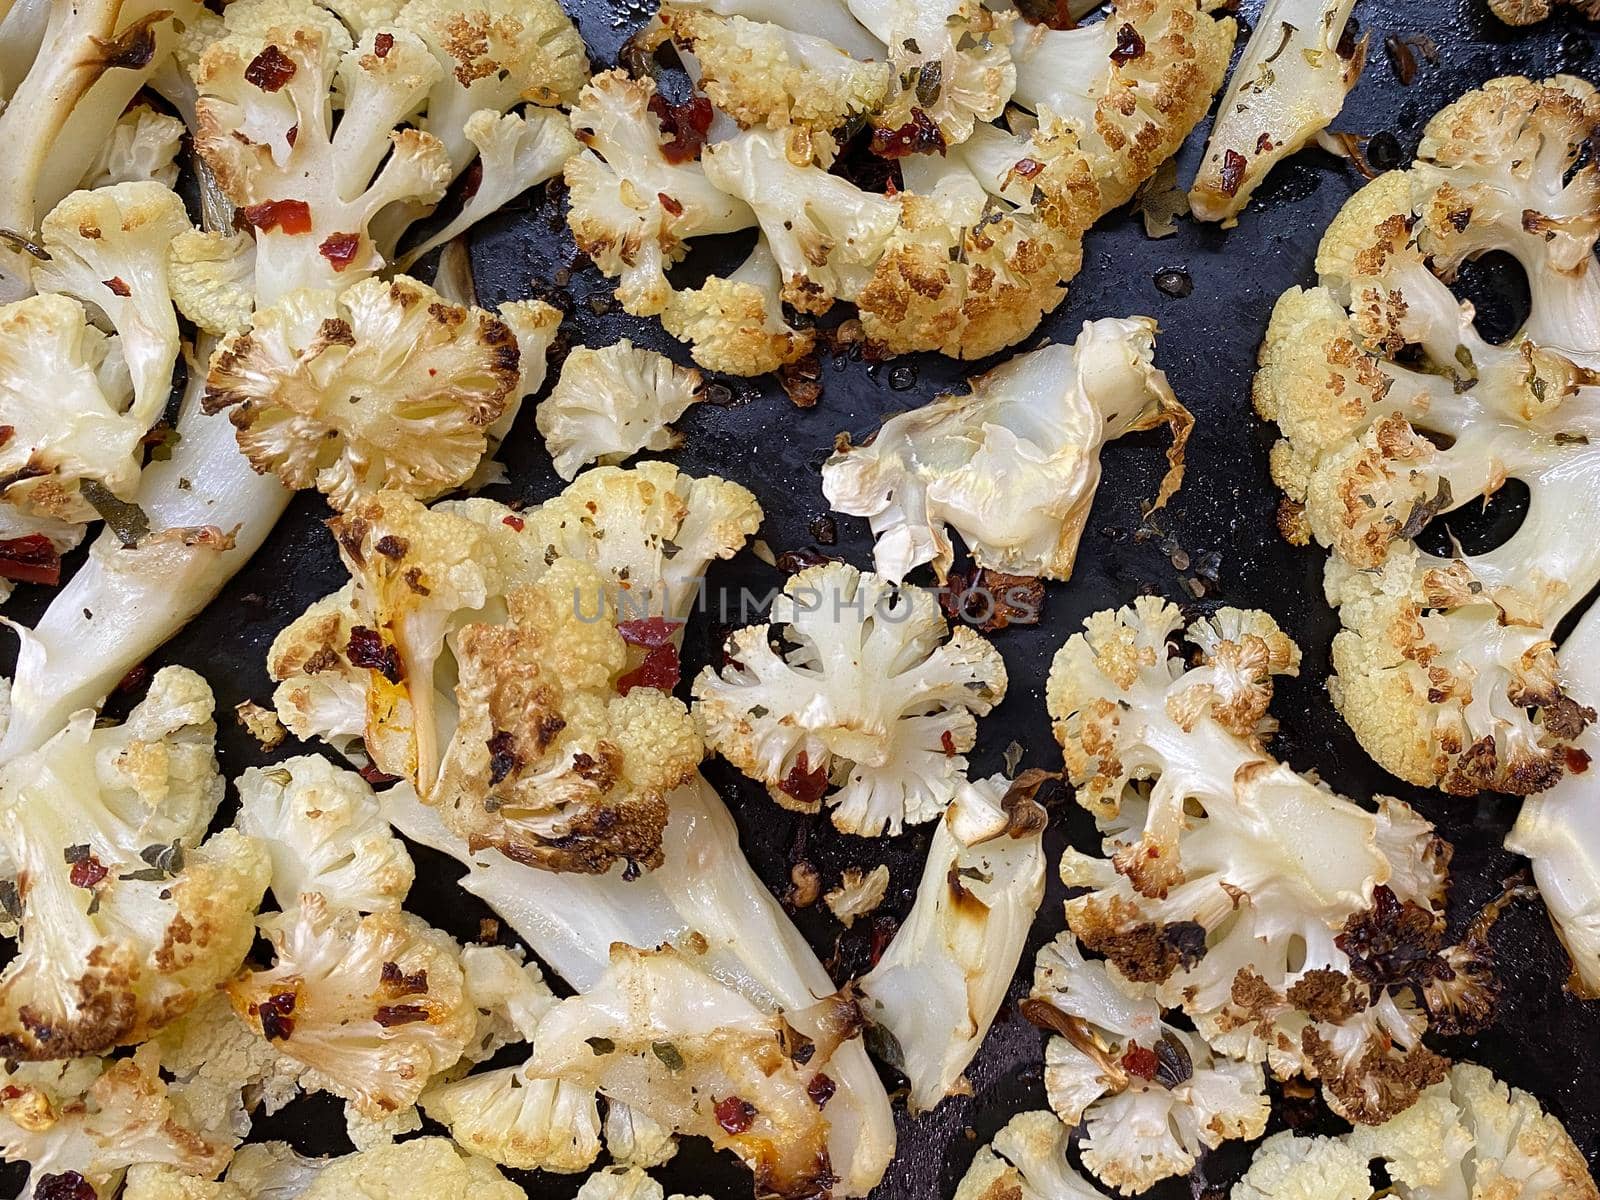 Cauliflower steaks baked with olive oil, herbs and spices on a black baking sheet background. Close-up.